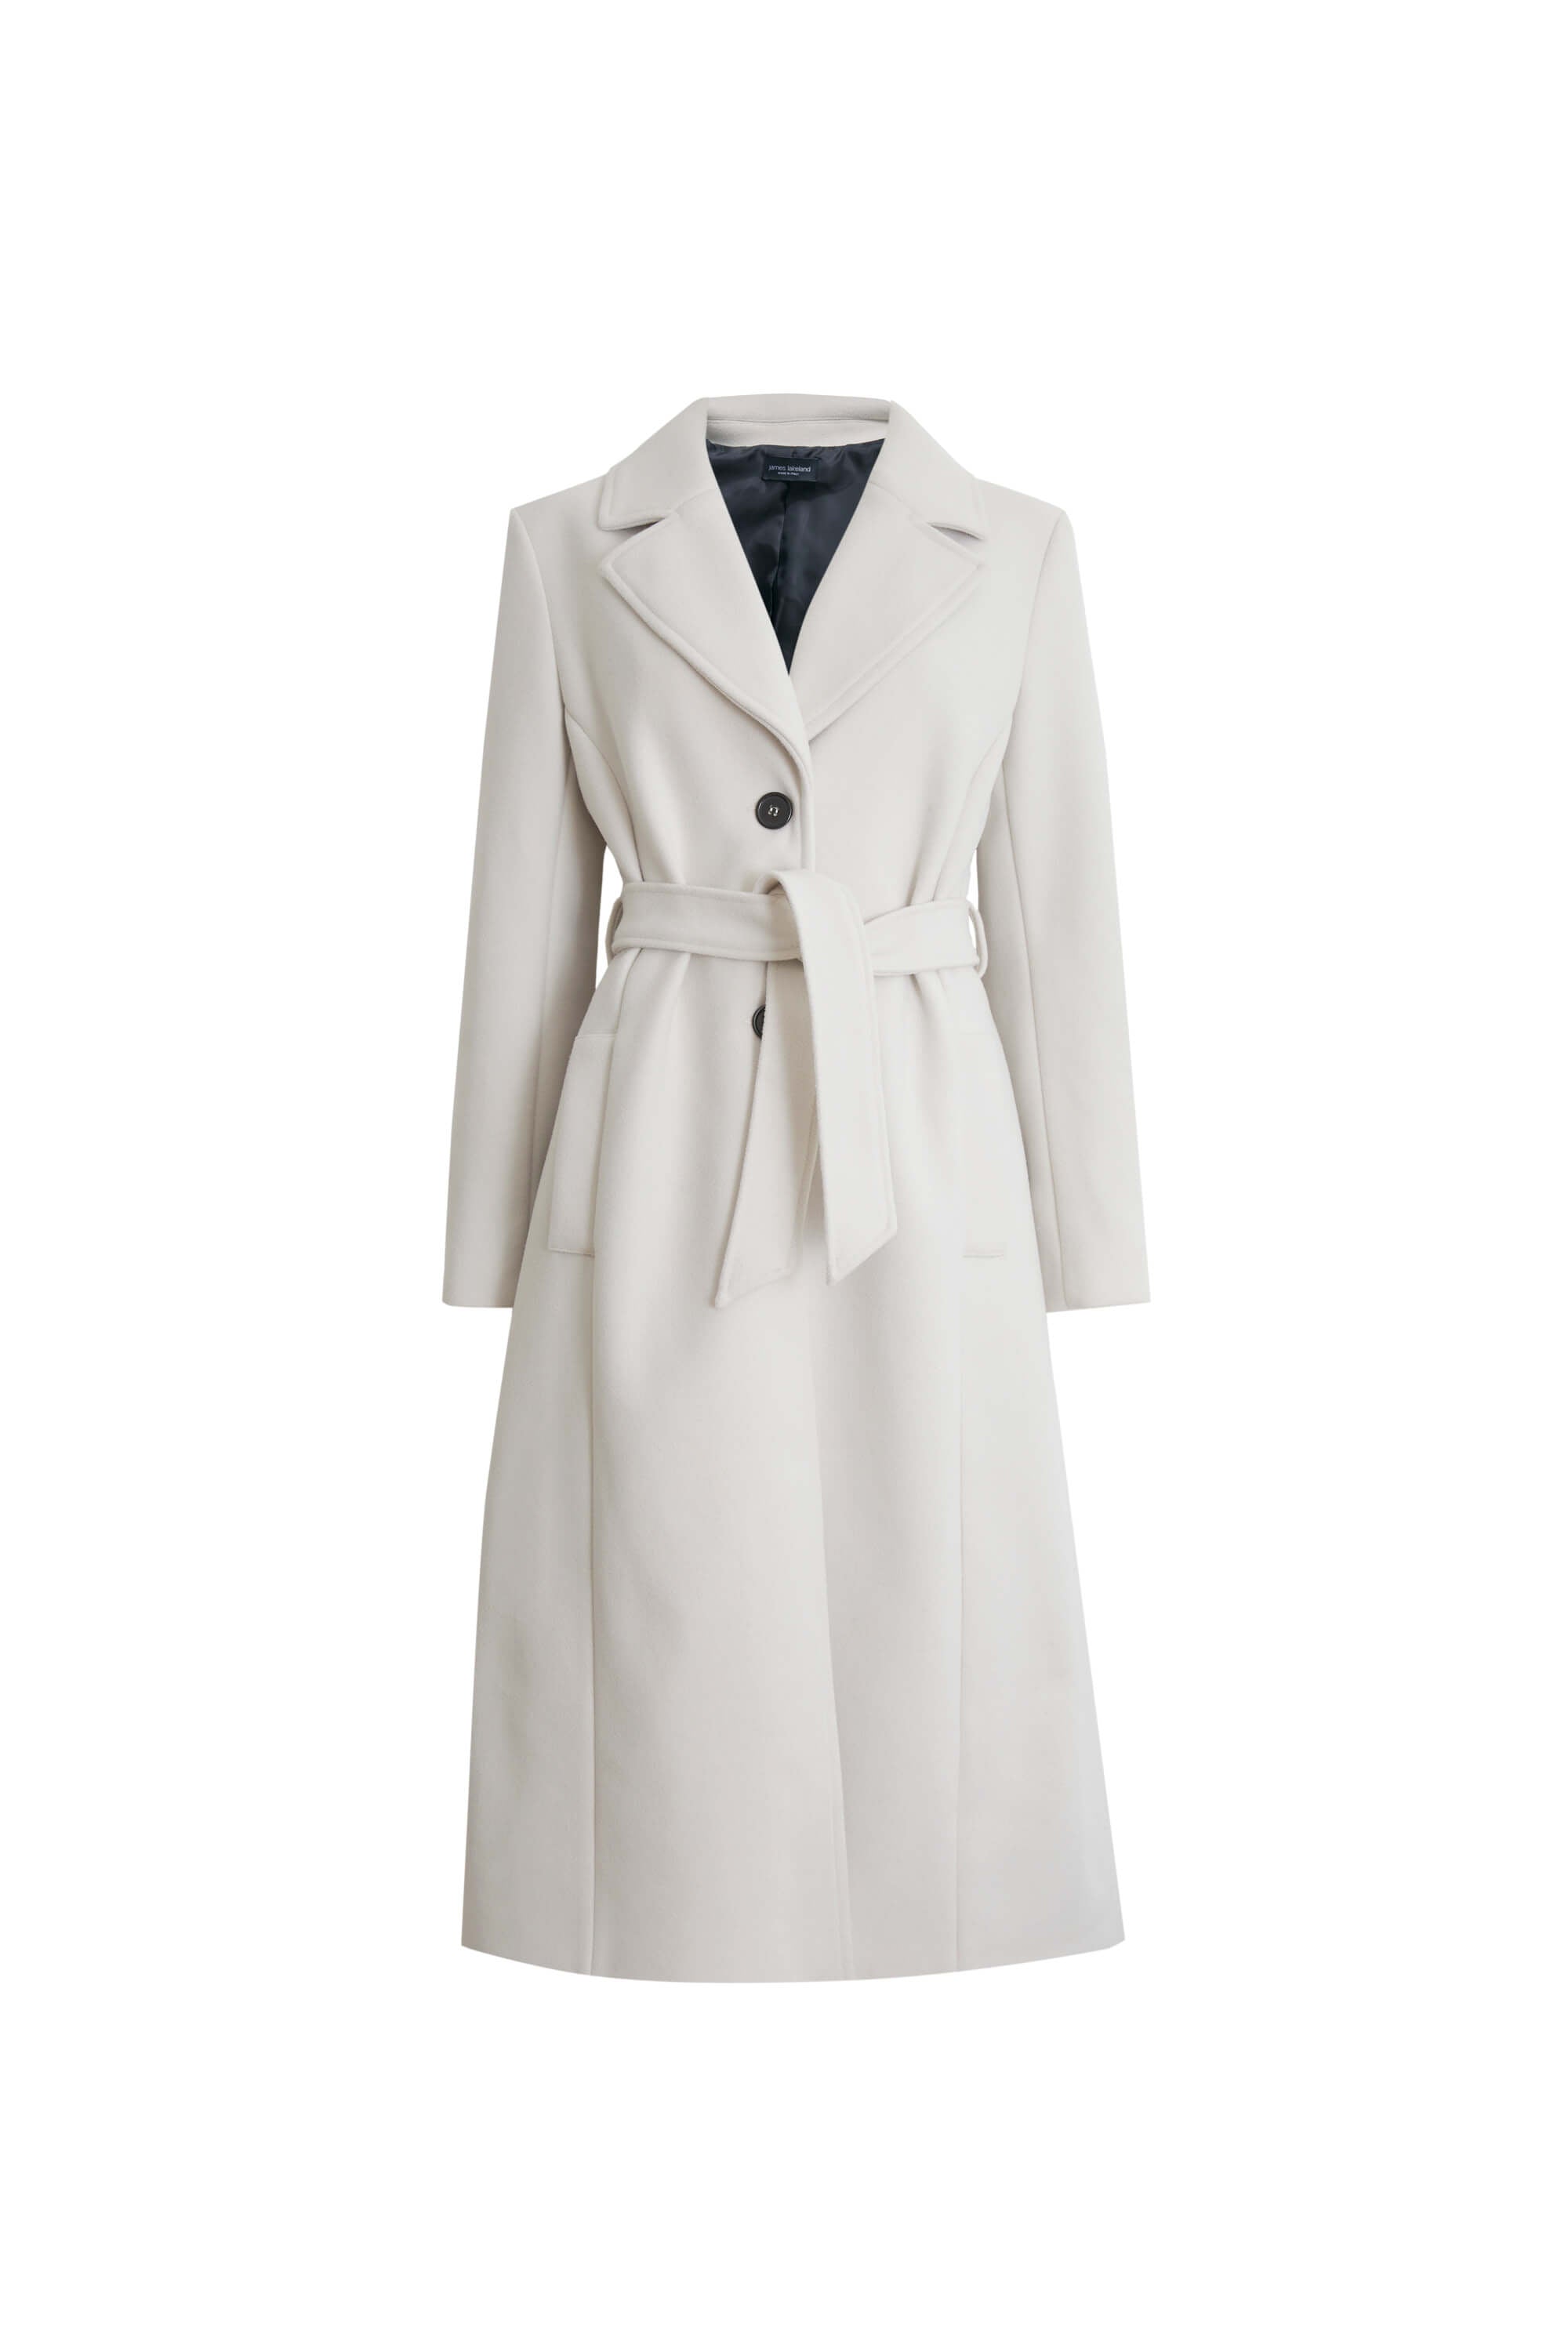 James Lakeland Women's Three Buttons Belted Coat In White